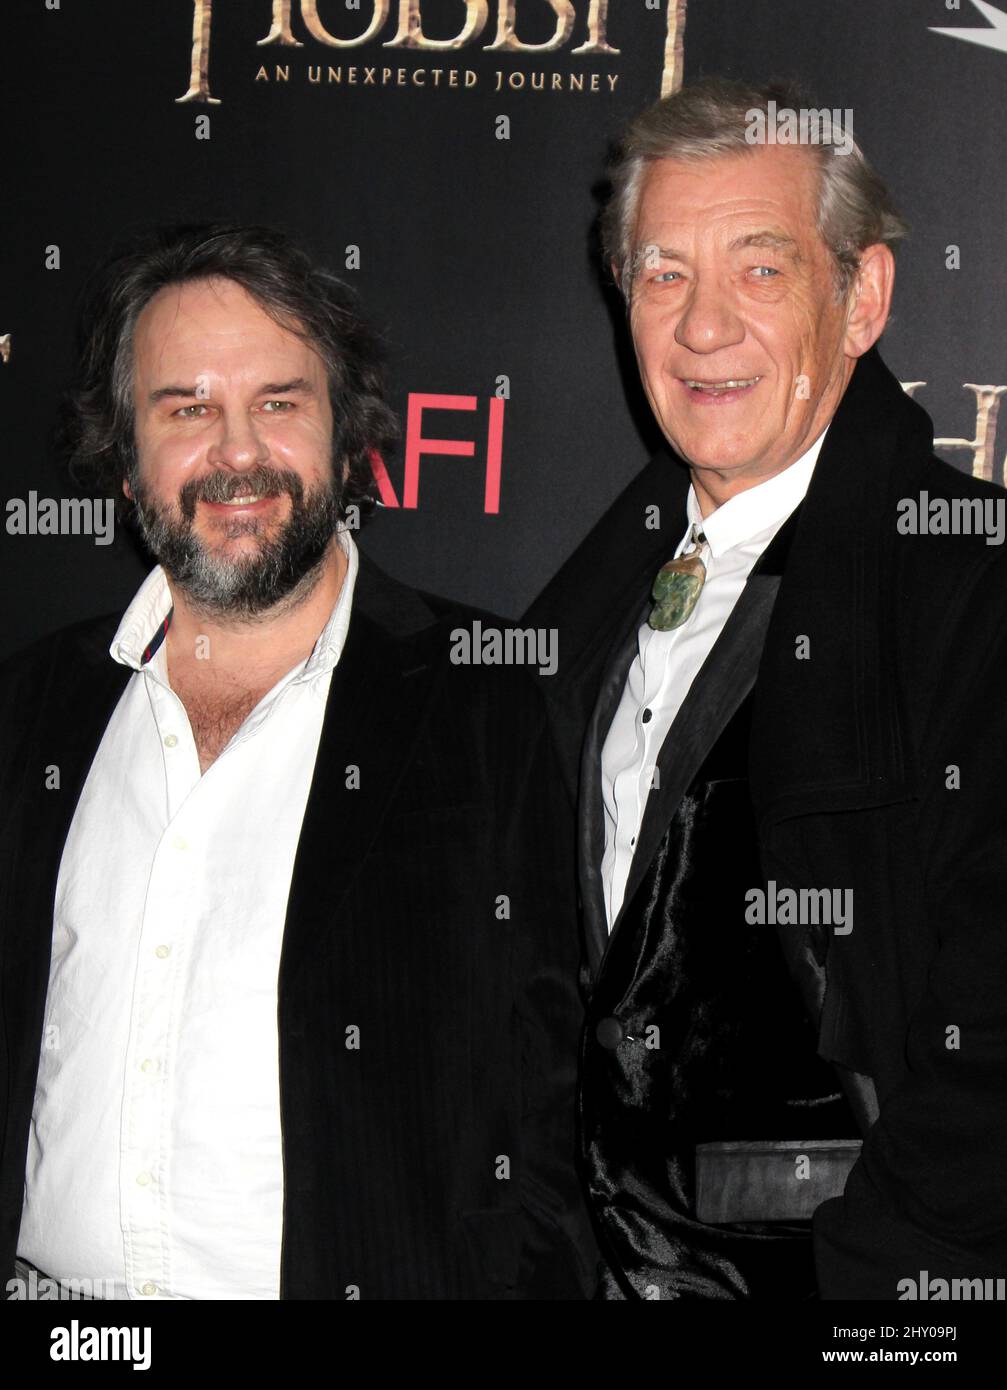 Peter Jackson and Ian McKellen attending 'The Hobbit: An Unexpected Journey' premiere held at The Ziegfeld Theatre in New York, USA. Stock Photo